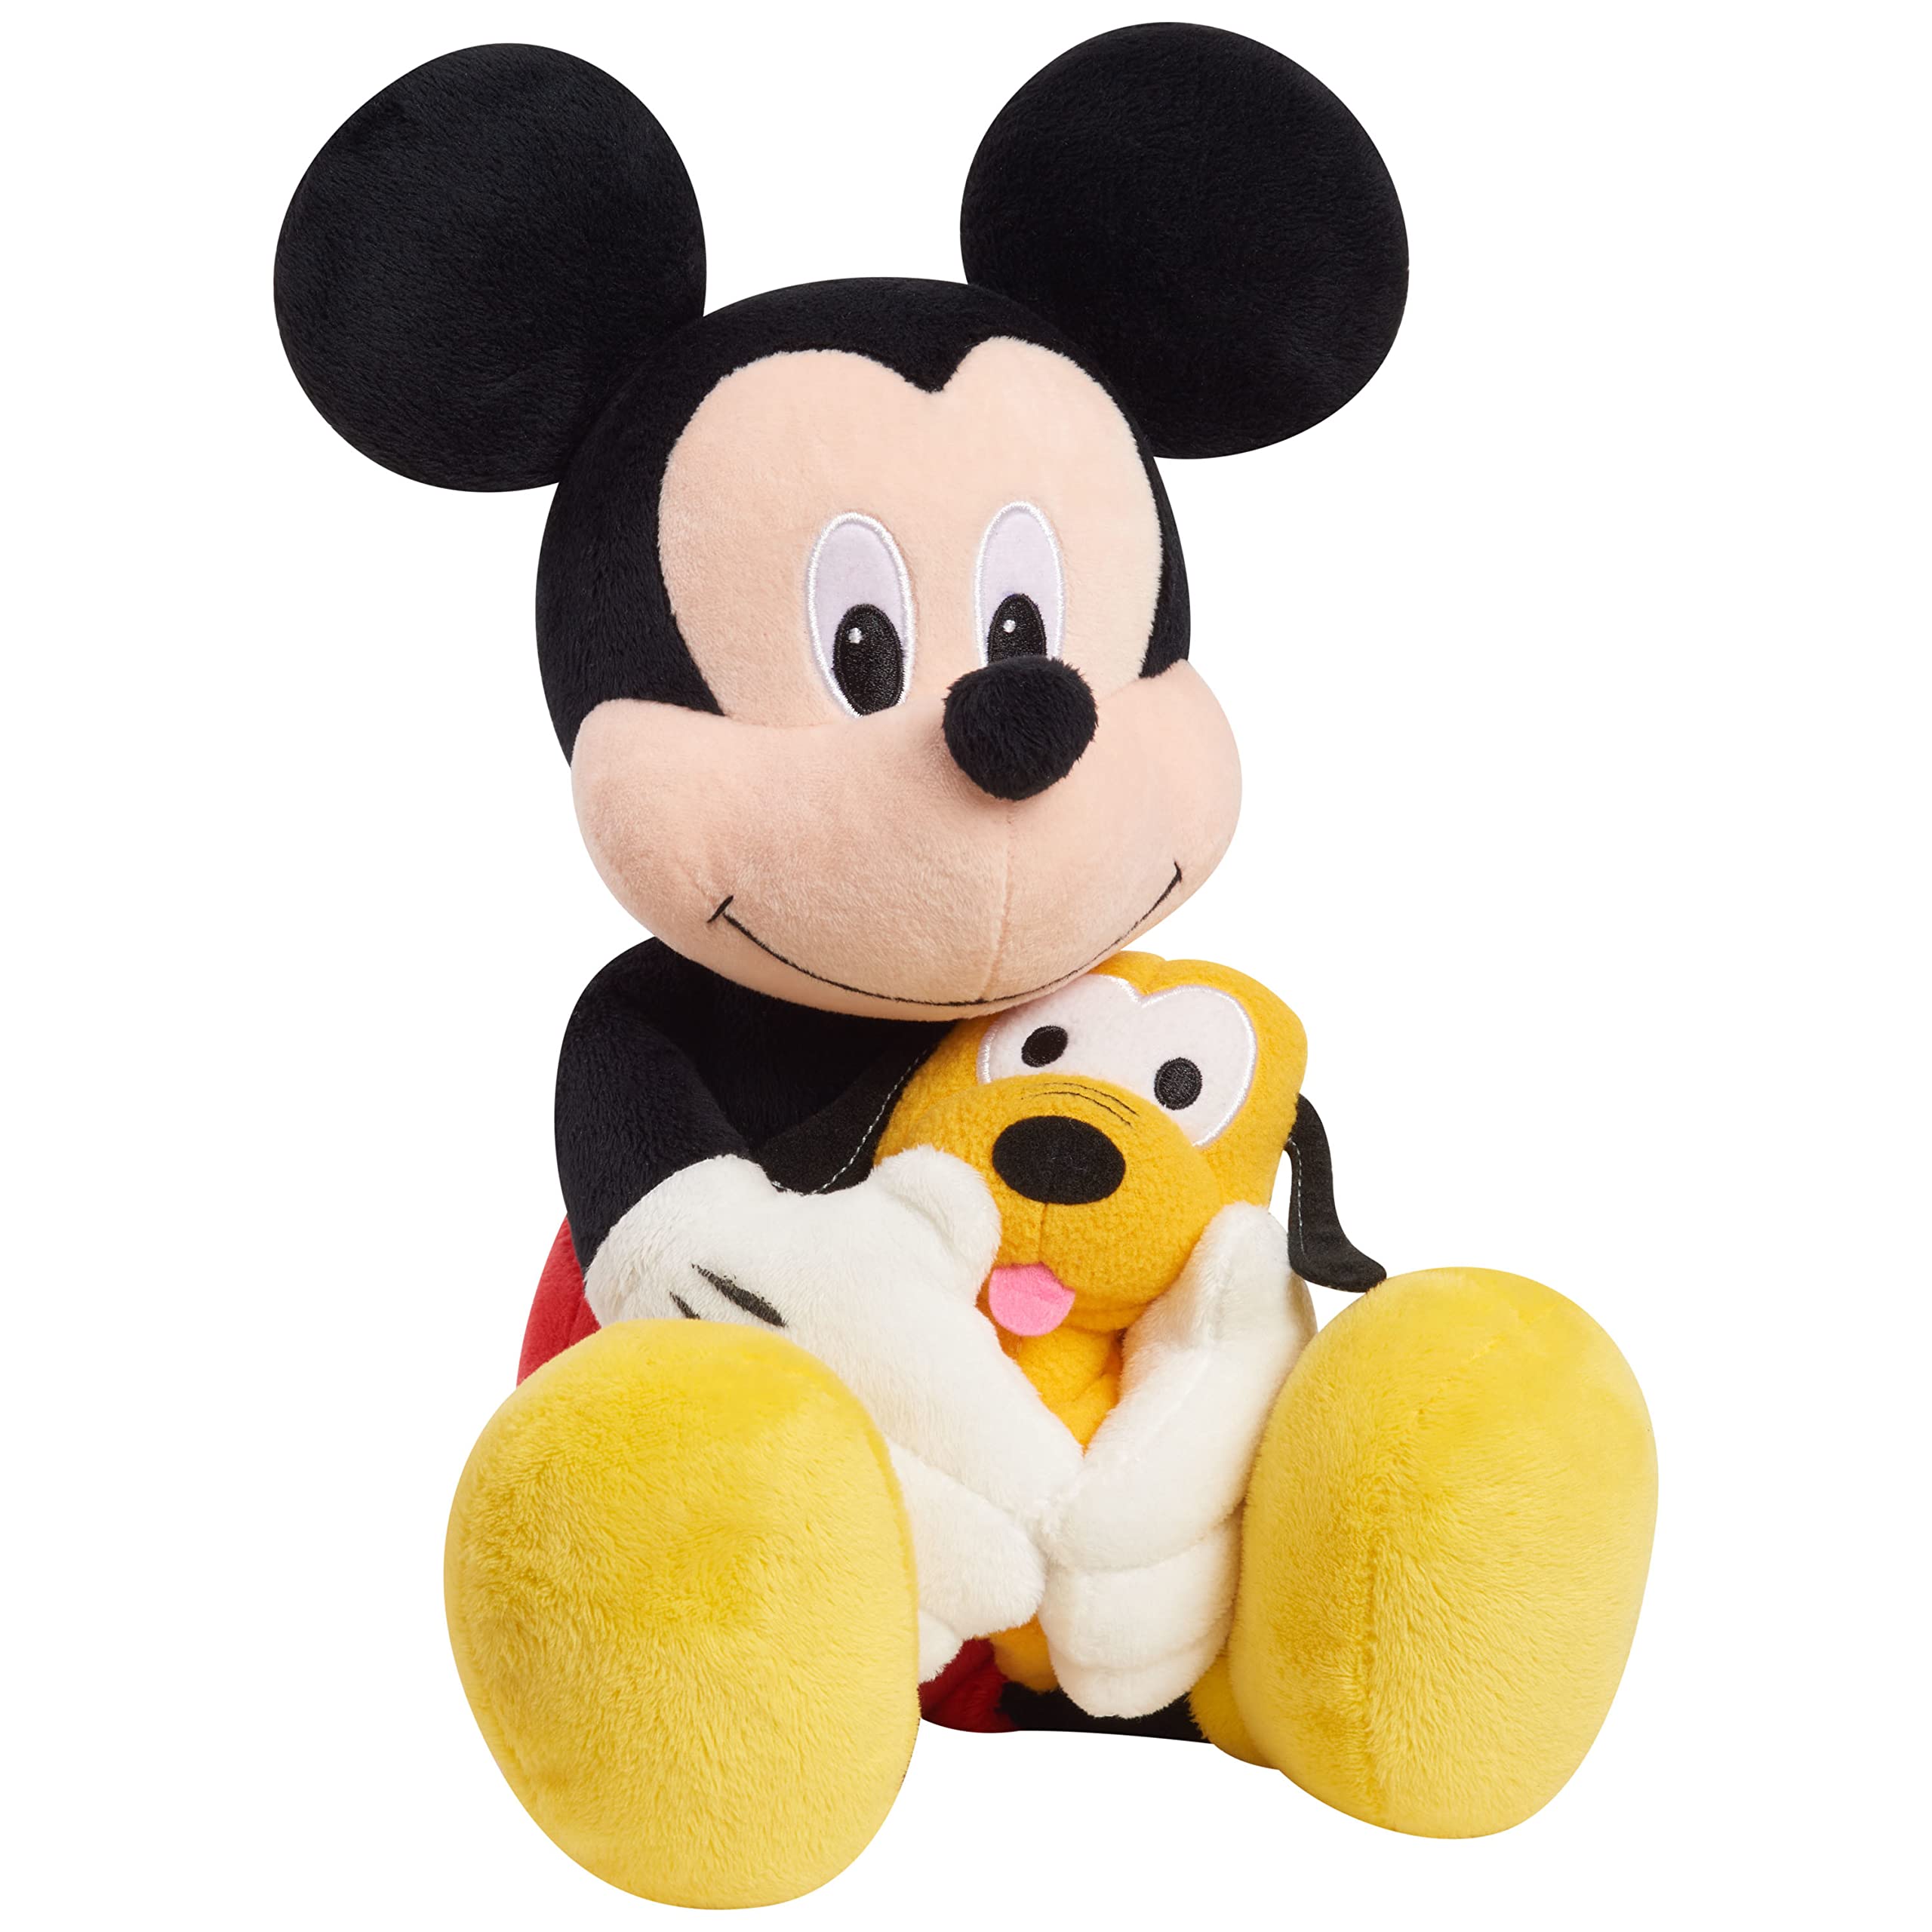 16" Just Play Lil Friends Disney Classic Mickey Mouse Plush w/ Attached Pluto $8.80 + Free Shipping w/ Prime or on $35+